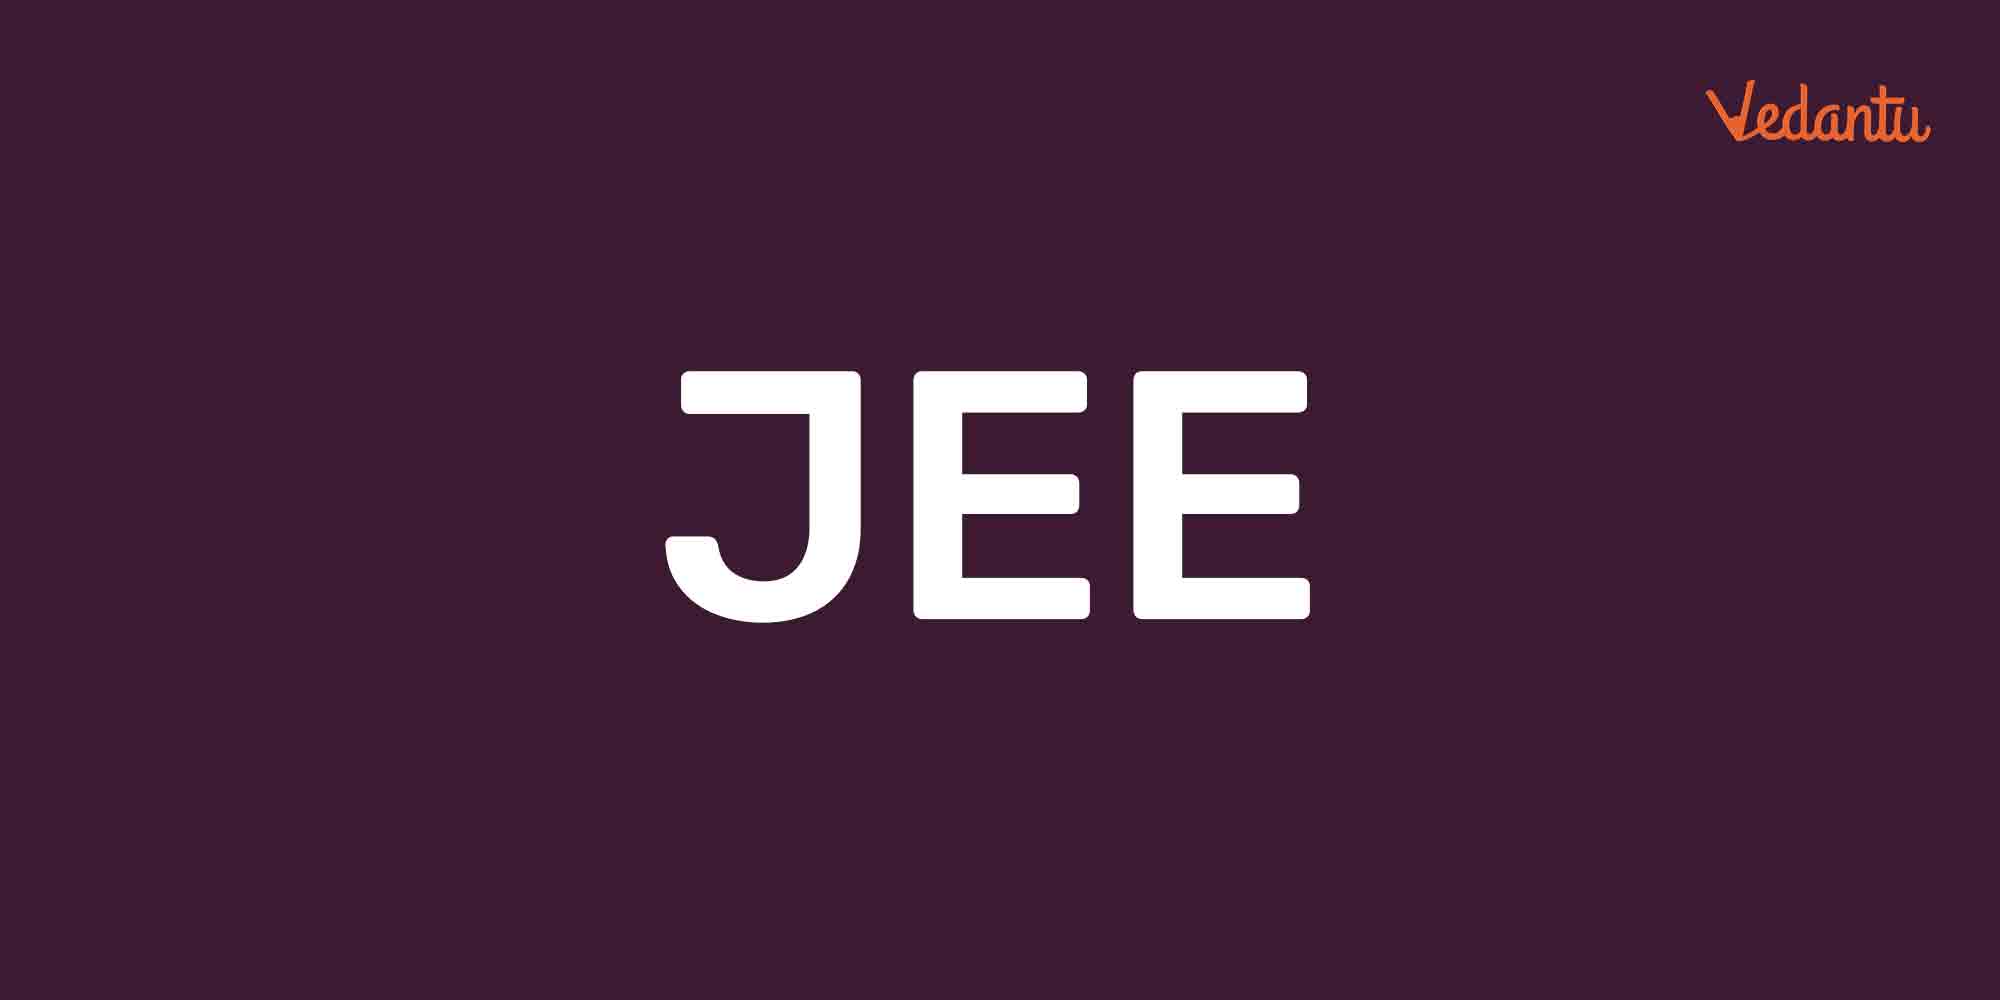 Free Study Material PDF Available at Vedantu for JEE Exams